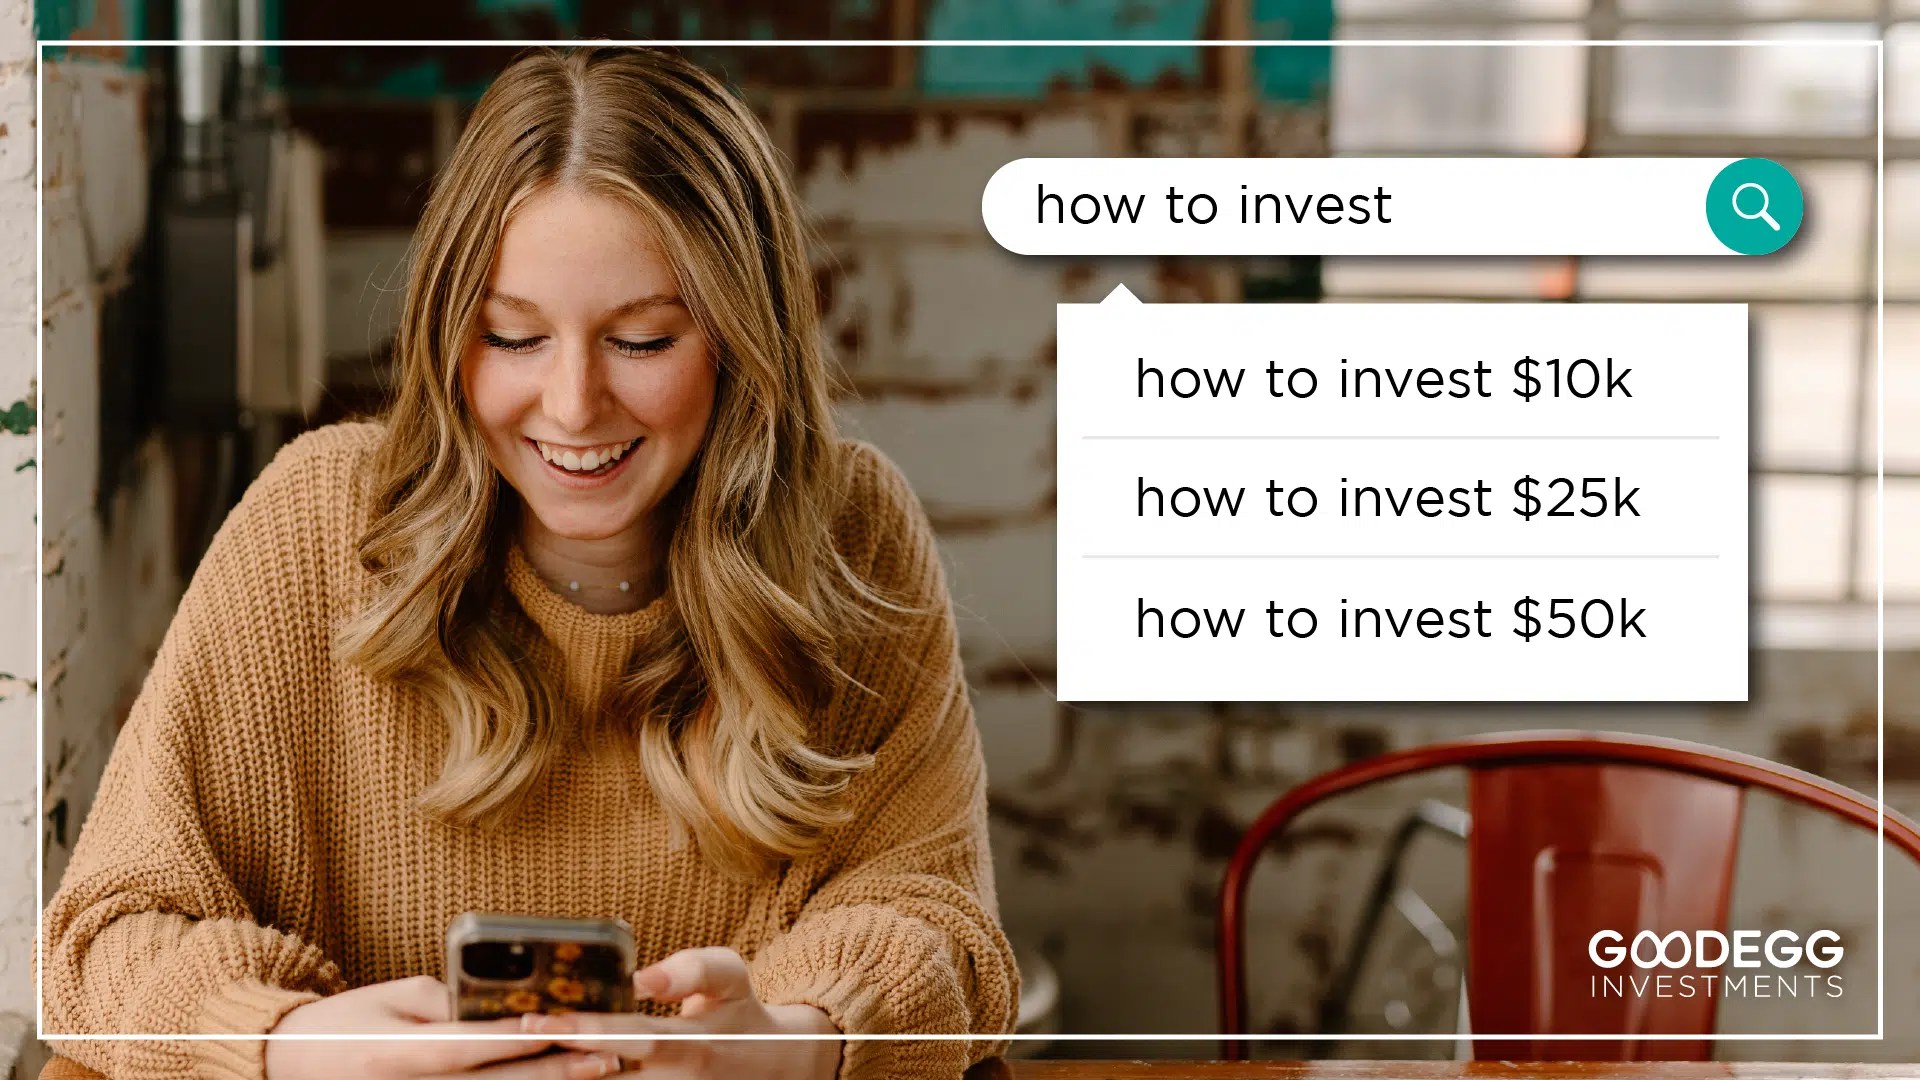 How To Invest $50K: 8 of the Best Ways | GOBankingRates